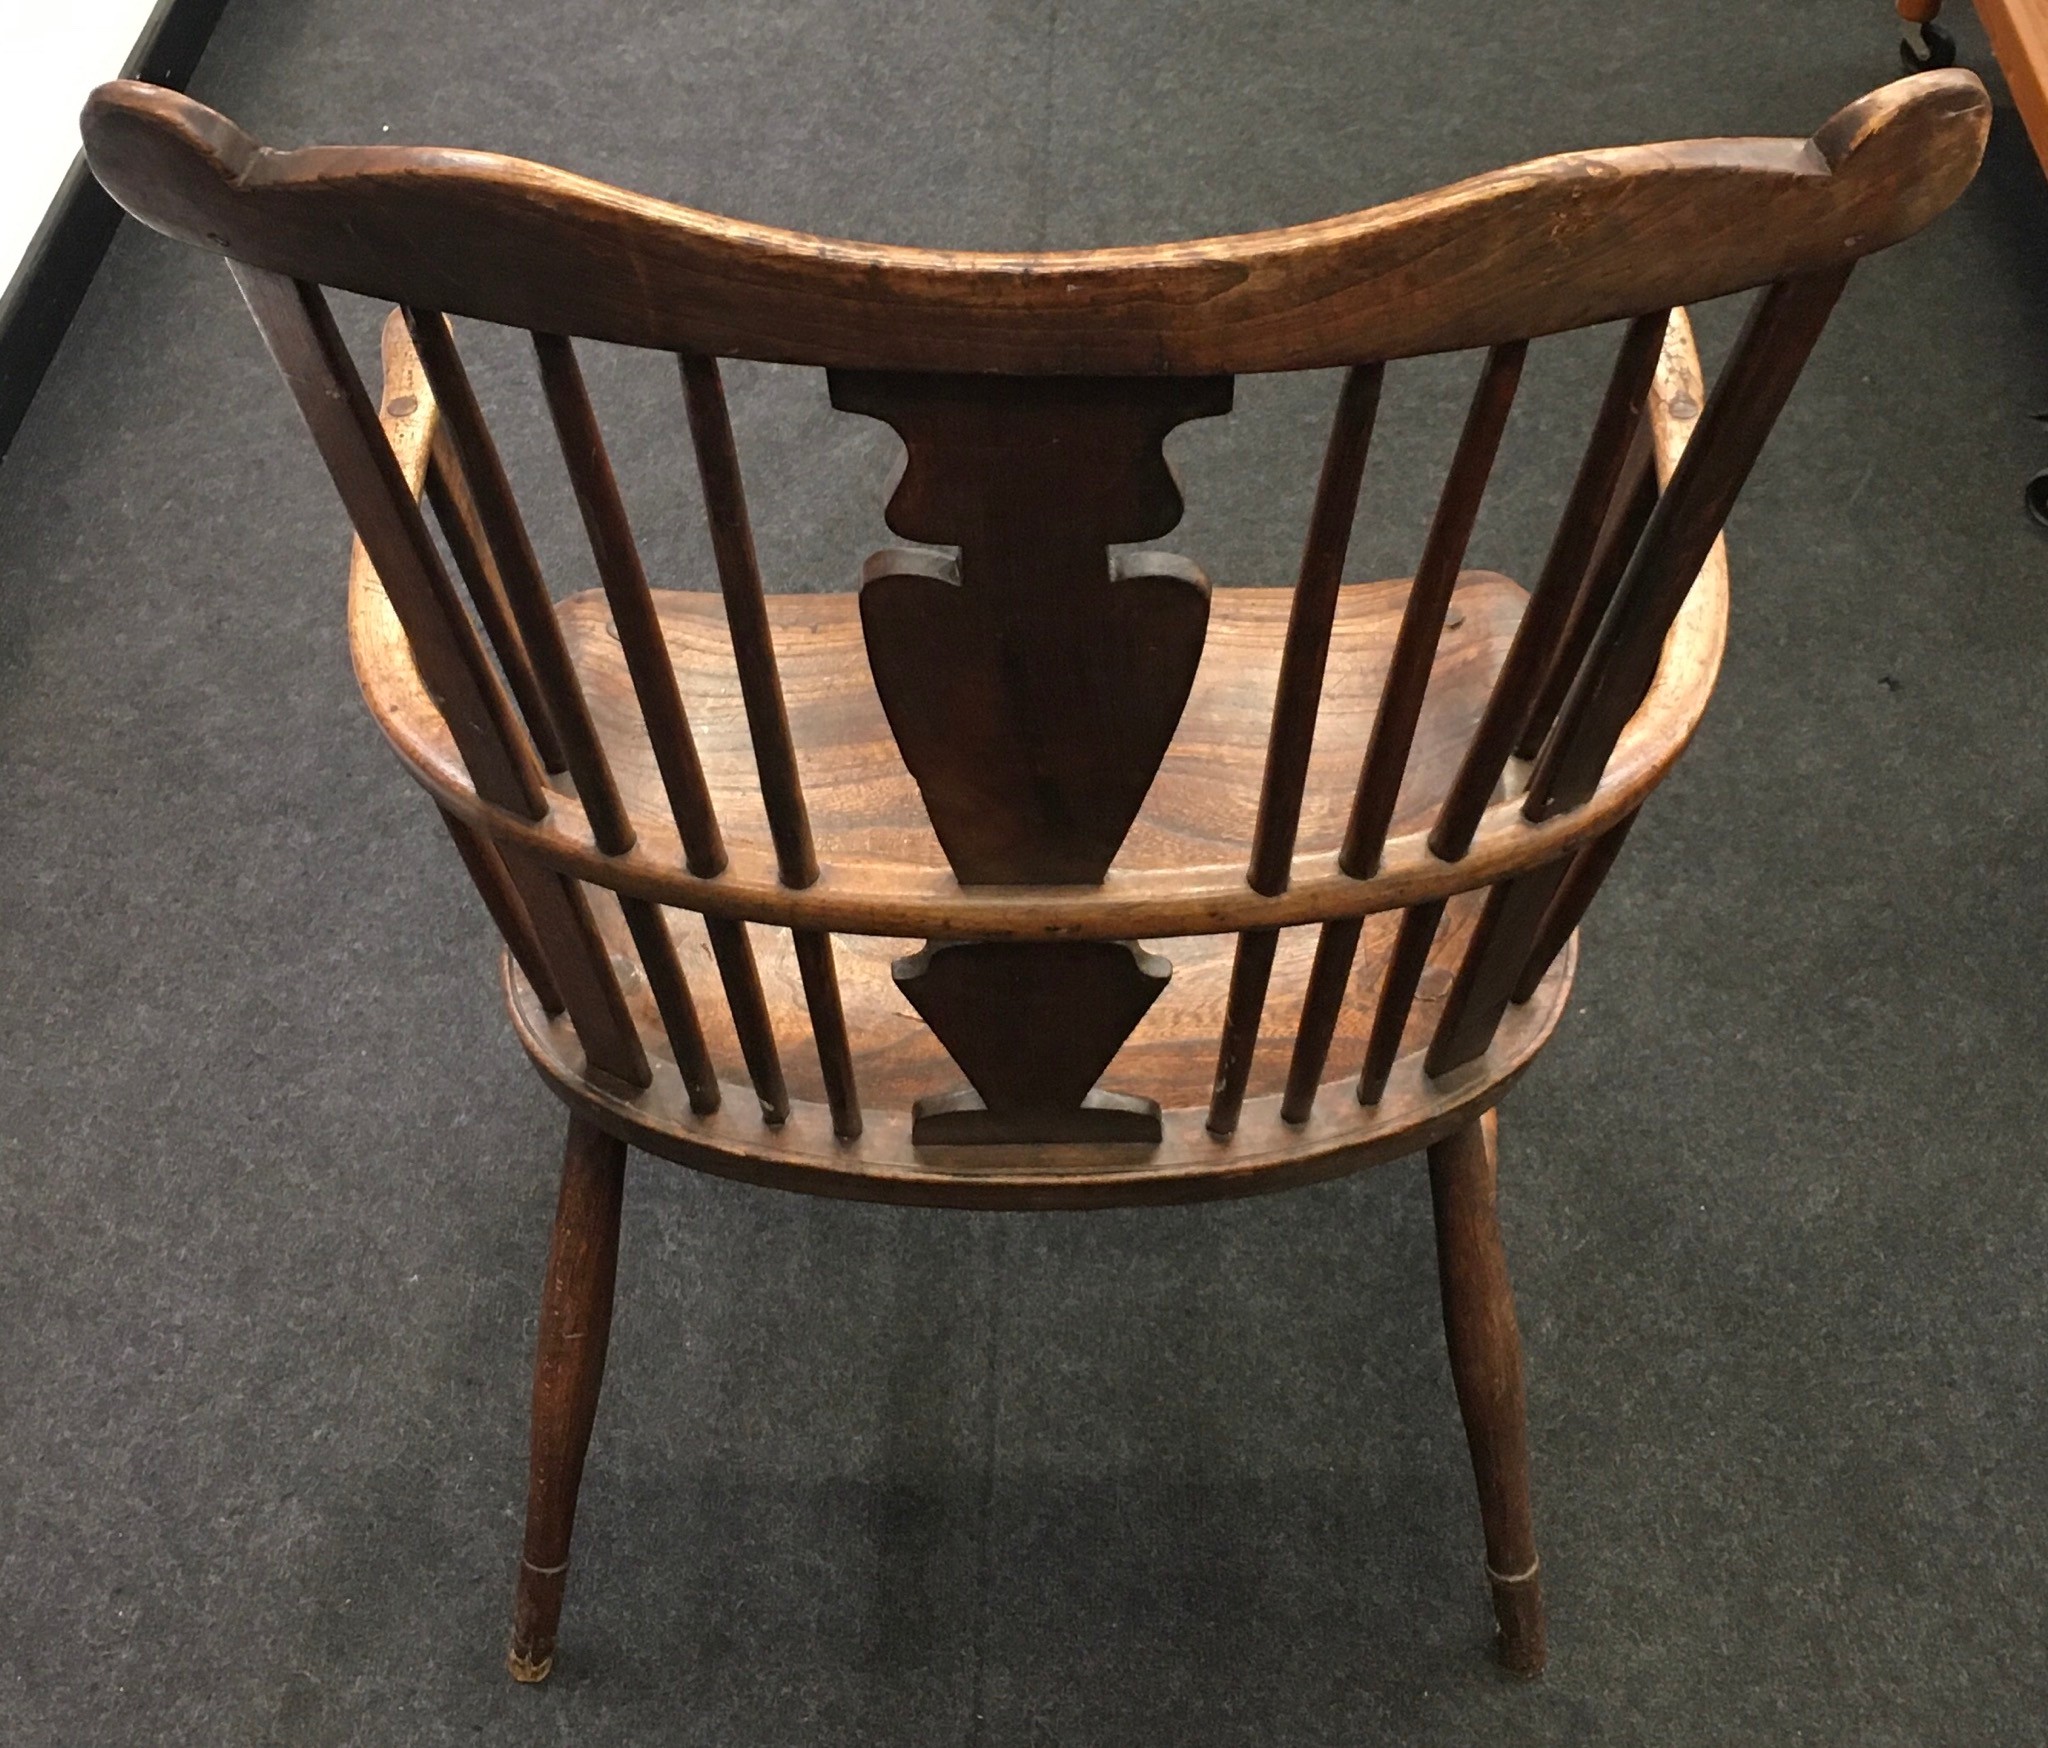 Antique Thames Valley Windsor armchair with elm seat. - Image 3 of 6